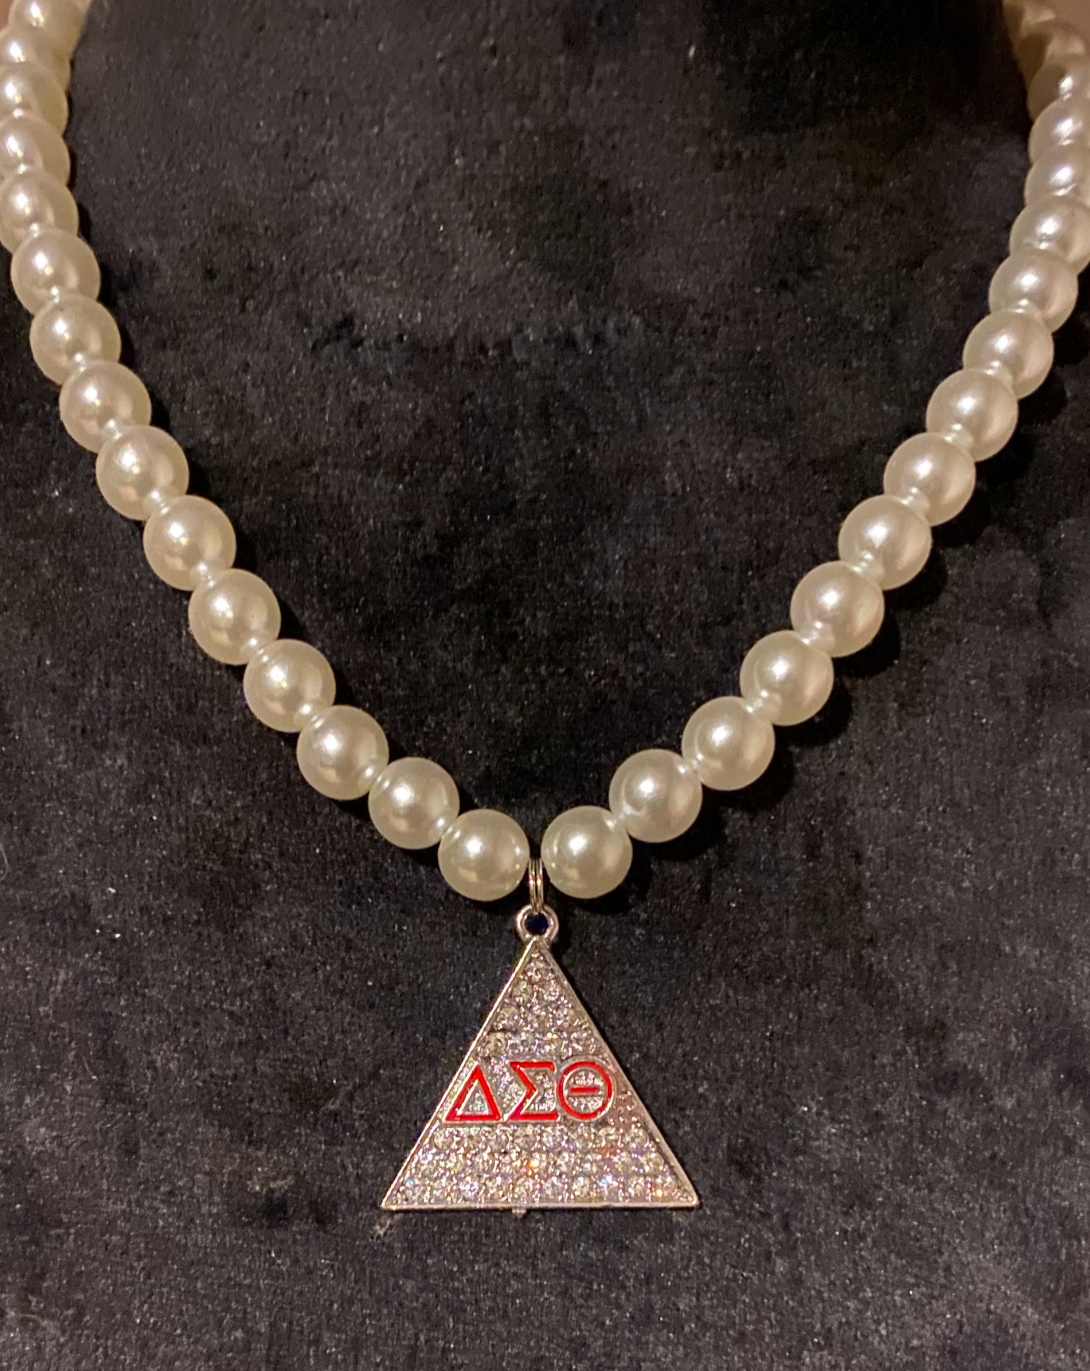 DST Pearls and Pyramid with Keepsake Pouch